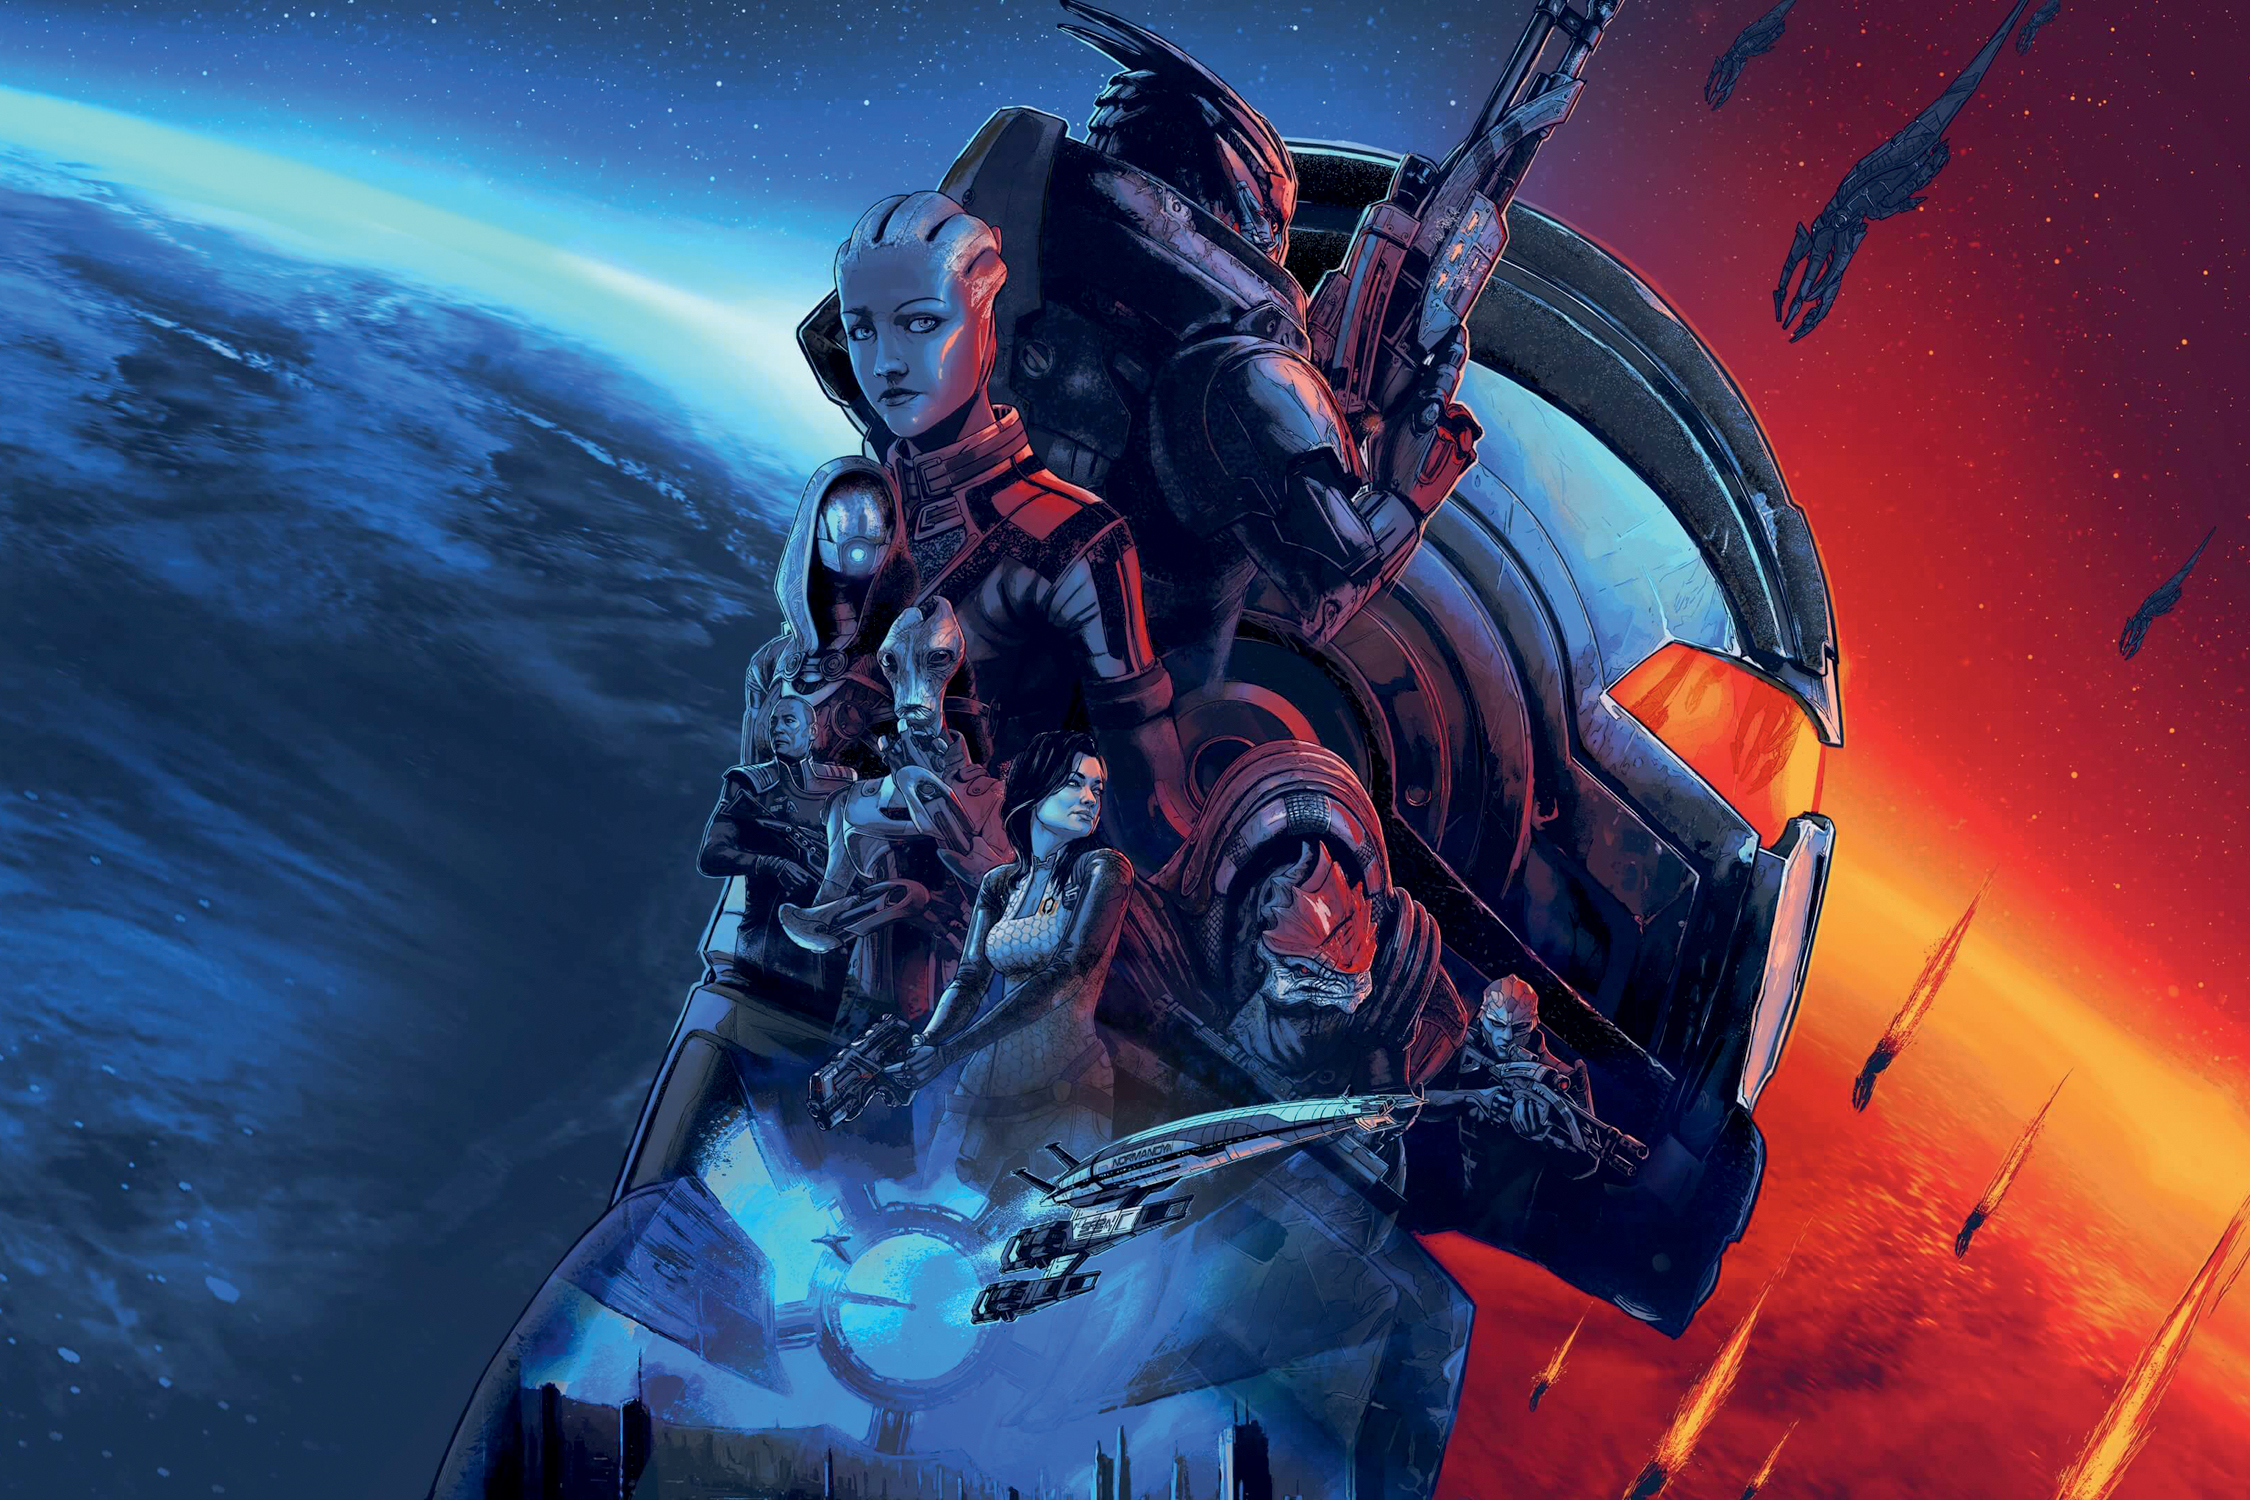 SCI-FI RPG - The Mass Effect Trilogy: Remade Almost Fifteen Years After Launch -